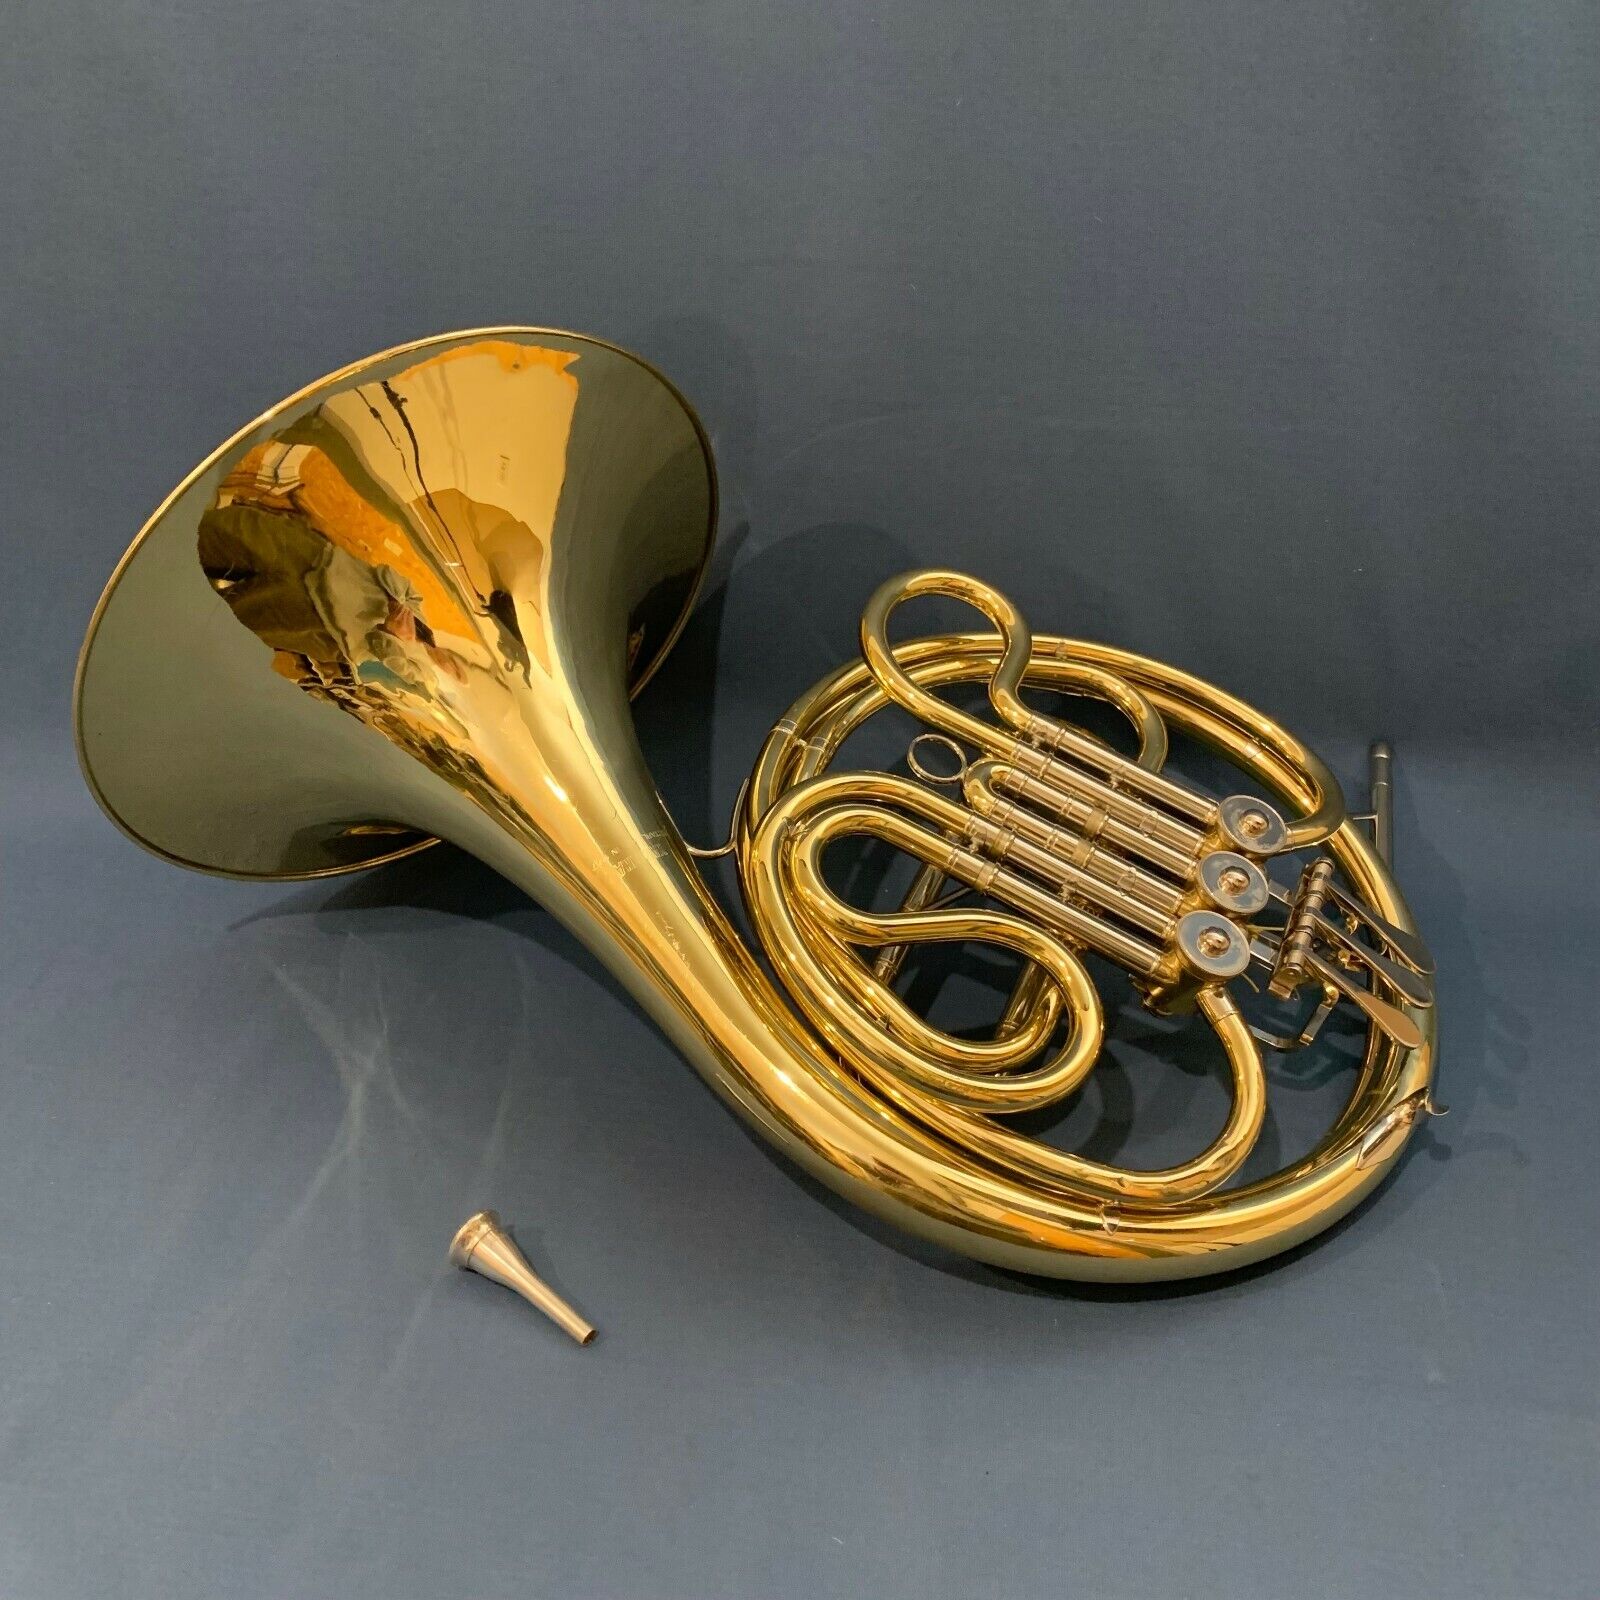 Yamaha YHR-314 II Single French Horn with Mouthpiece & Case S/N